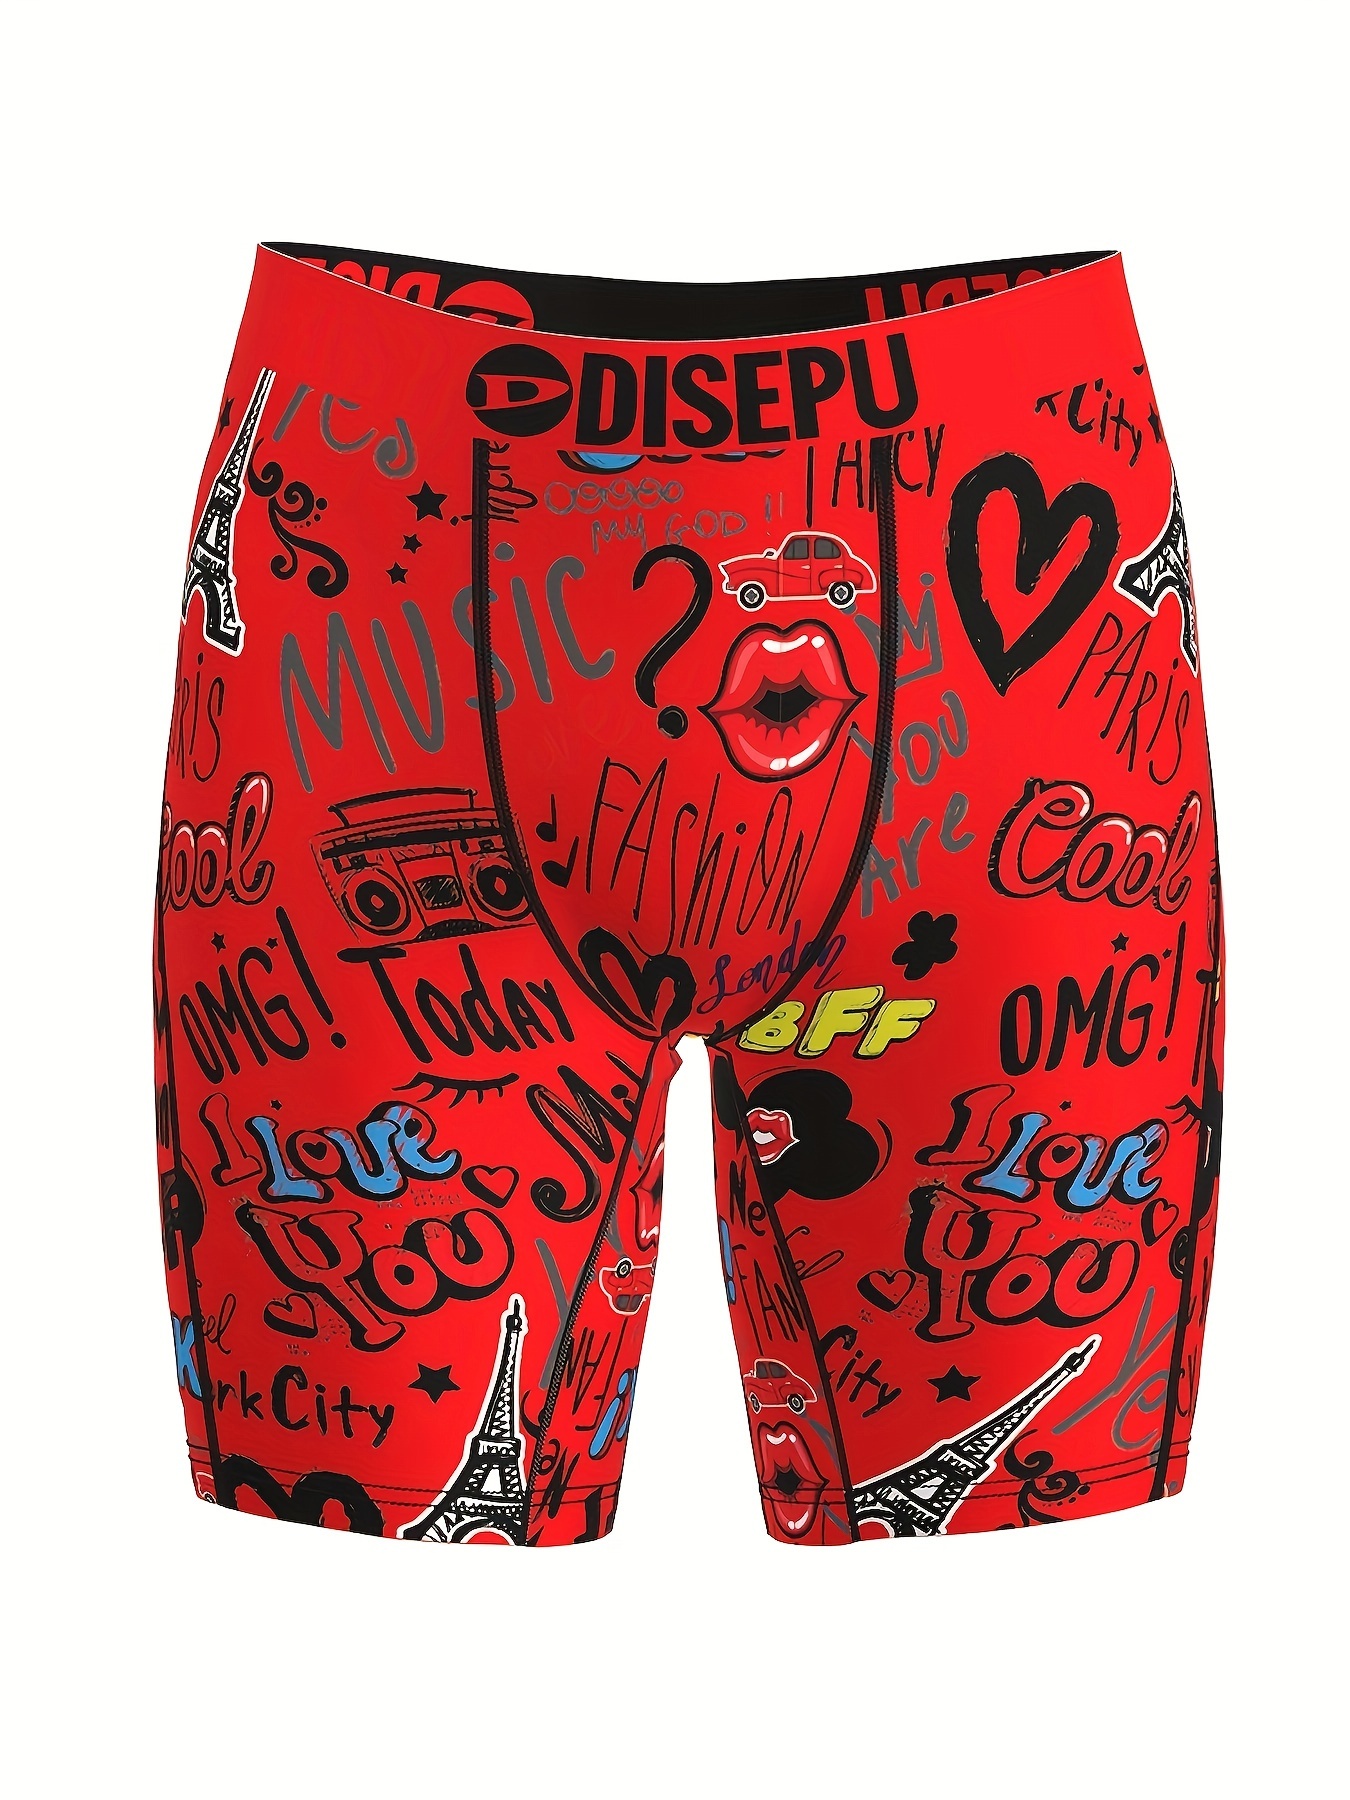 BRIEF INSANITY Soft Comfy Boxer Shorts for Men and Women  Beach Life  Themed Graphic Print Loose Fit Smooth Underwear (Large, Surfboard) at   Men's Clothing store